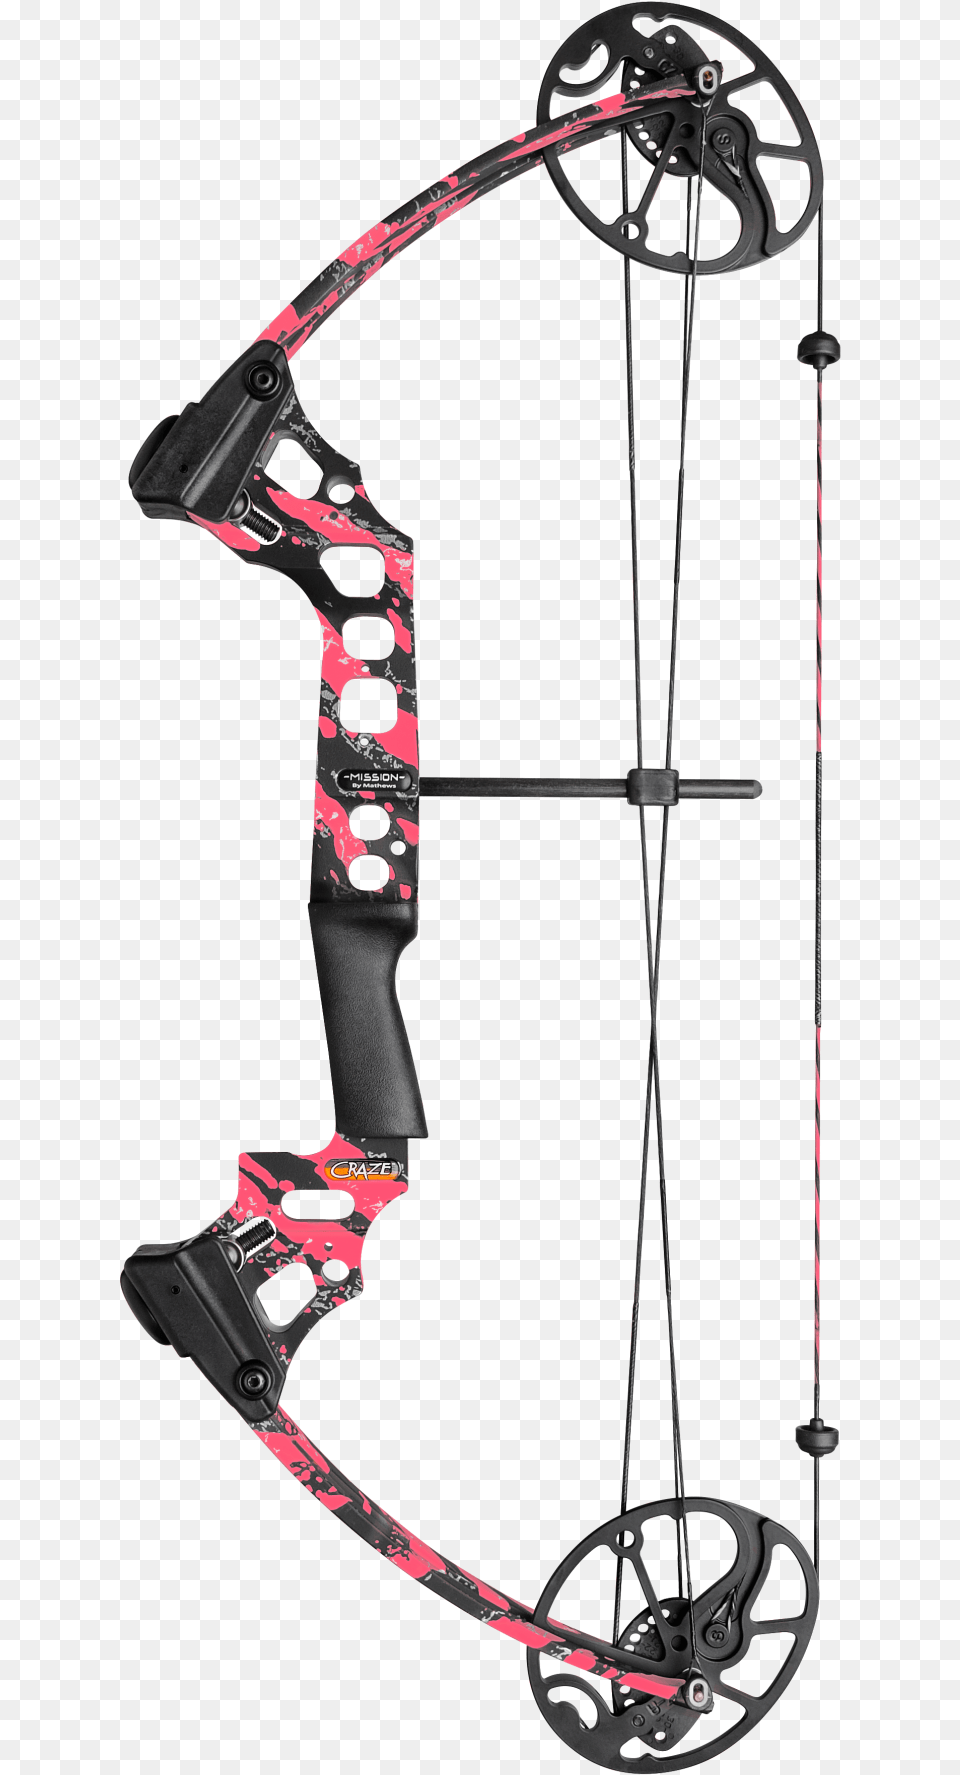 Craze Camo Mission Archery Compact Bow Hunting Gear Mission Craze Bow, Weapon, Machine, Wheel Png Image